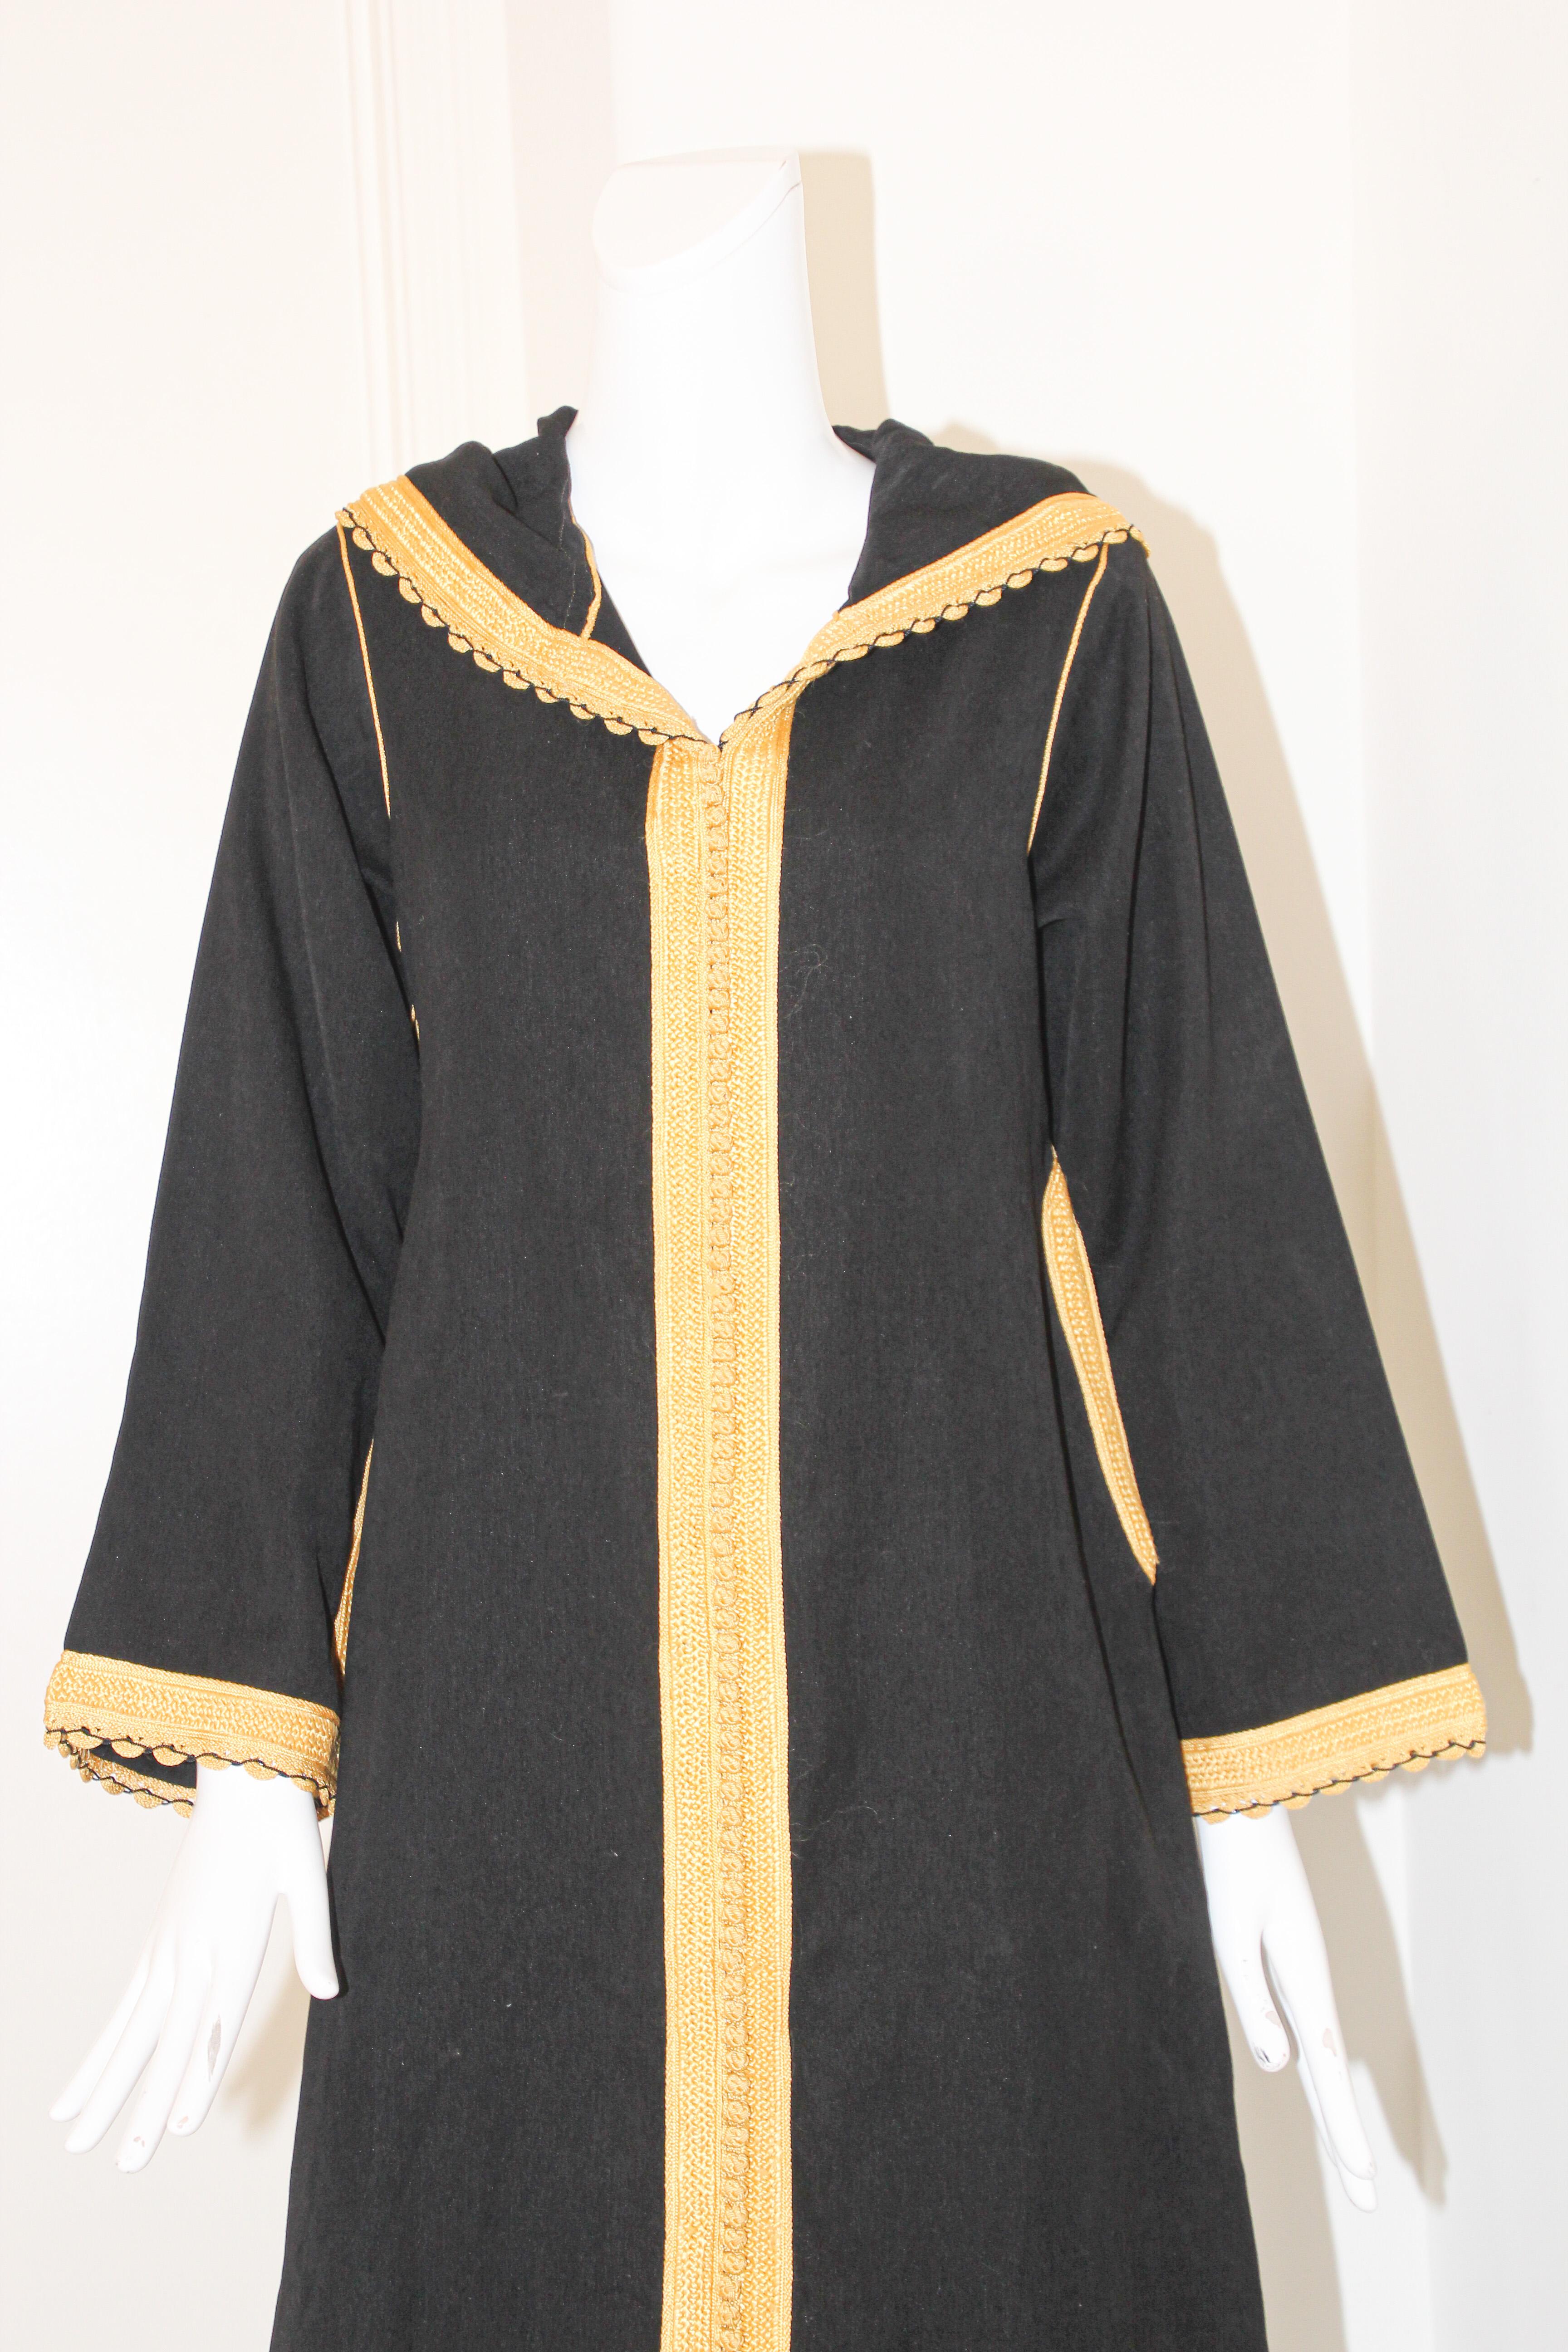 Vintage Moroccan Caftan, black and gold embroidered trim, ca. 1970s
Vintage Moroccan black caftan in linen fabric with gold trim embroidered,
circa 1970s.
This djellabah is crafted in Morocco and tailored for a relaxed fit, features a traditional